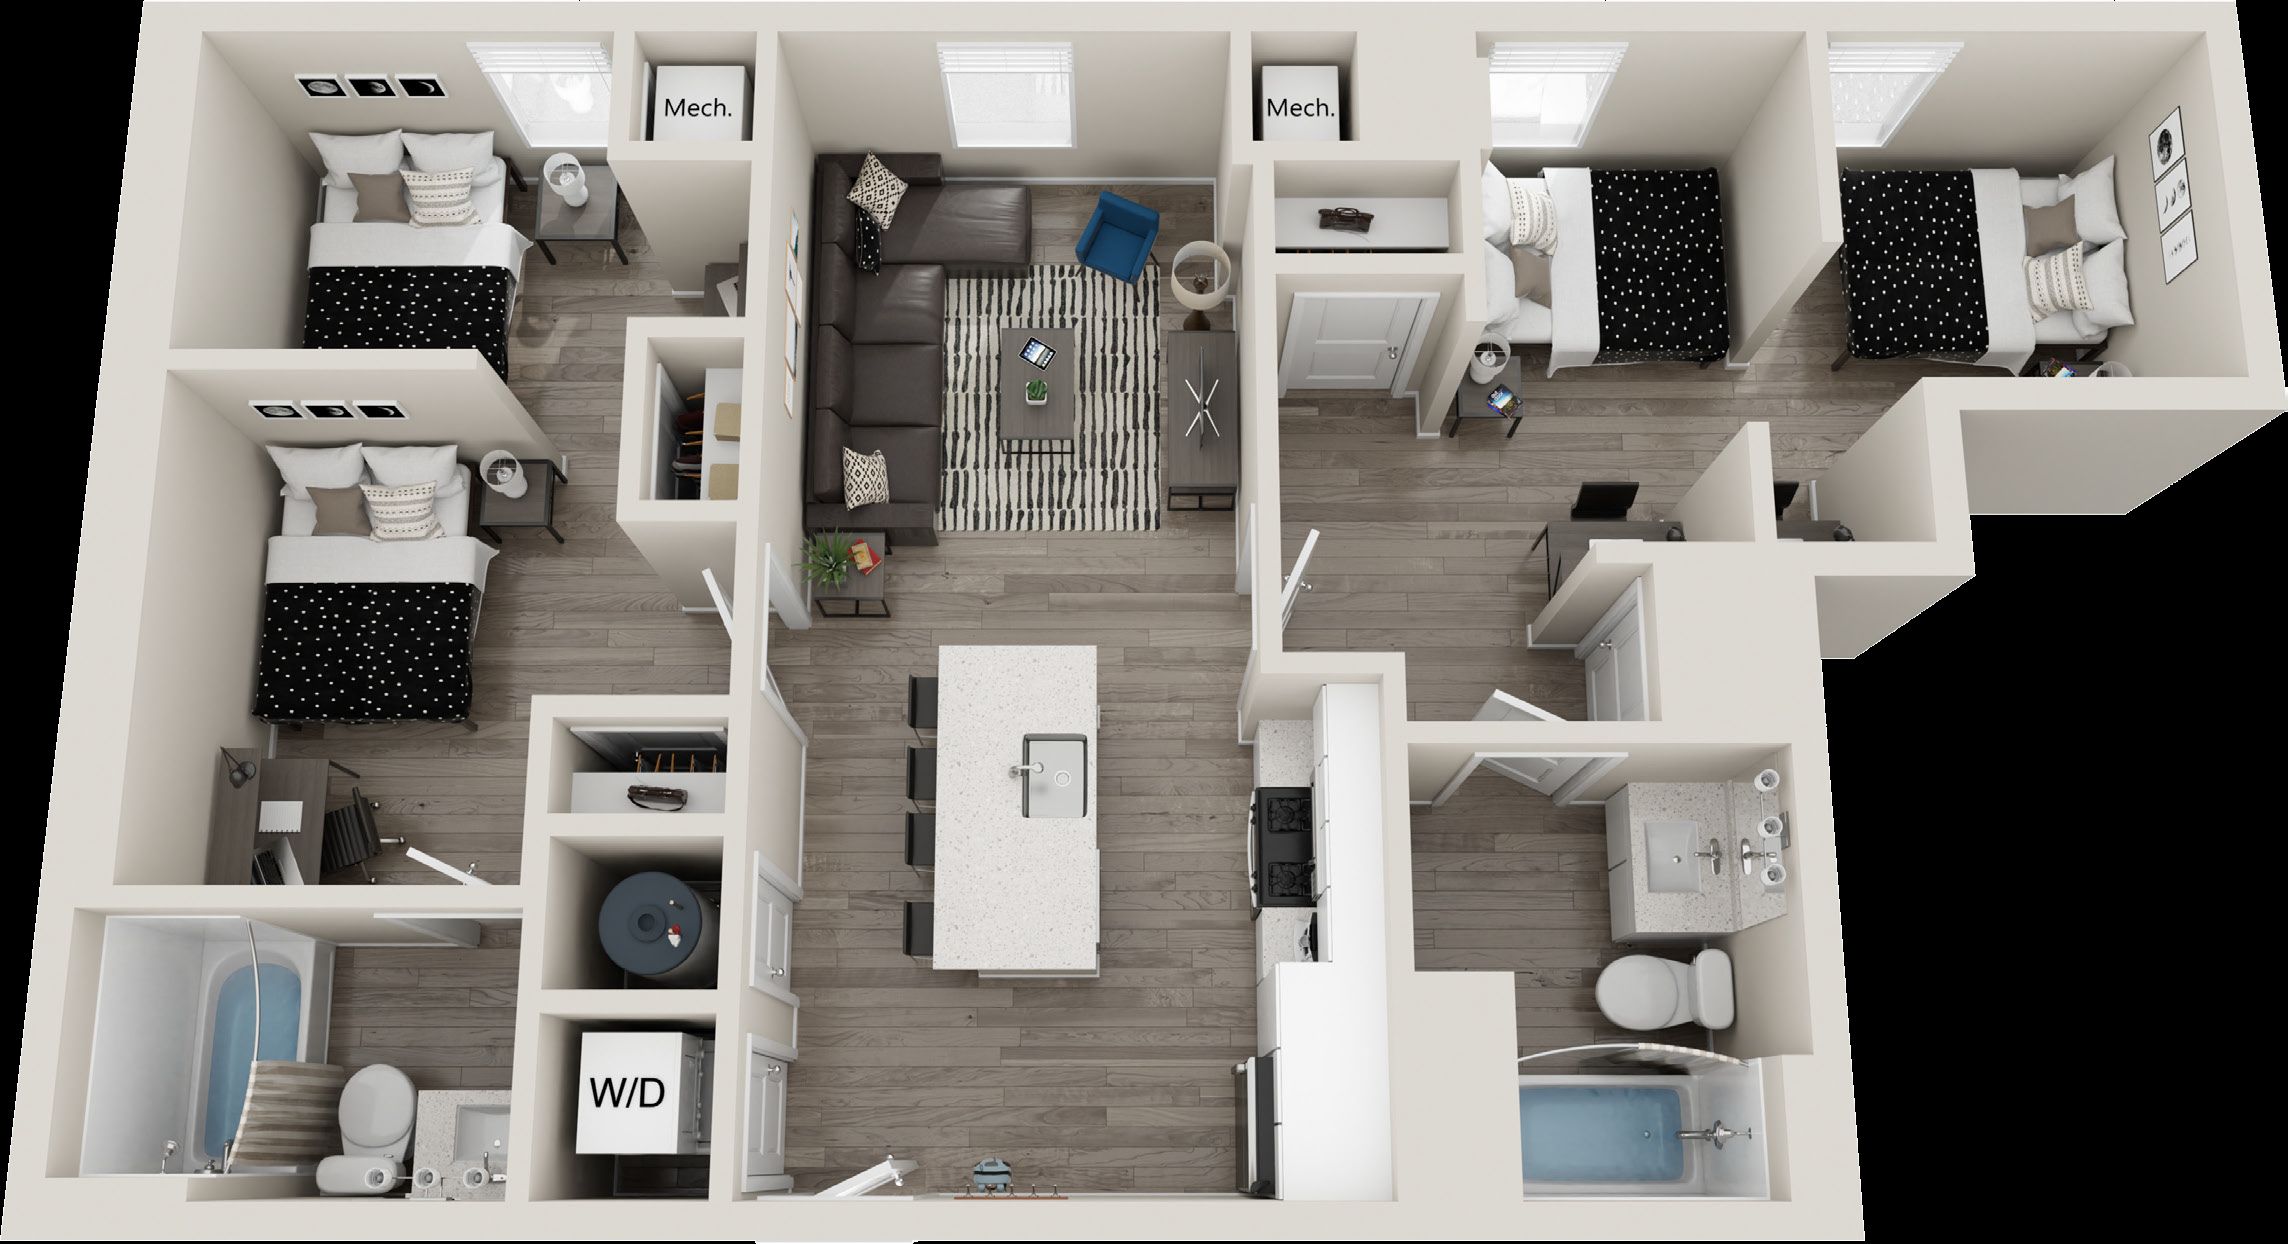 The Standard at Philadelphia at 119 South 31st Street. Floor plan of a two-bedroom apartment of type Brookhaven. Credit: Landmark Properties